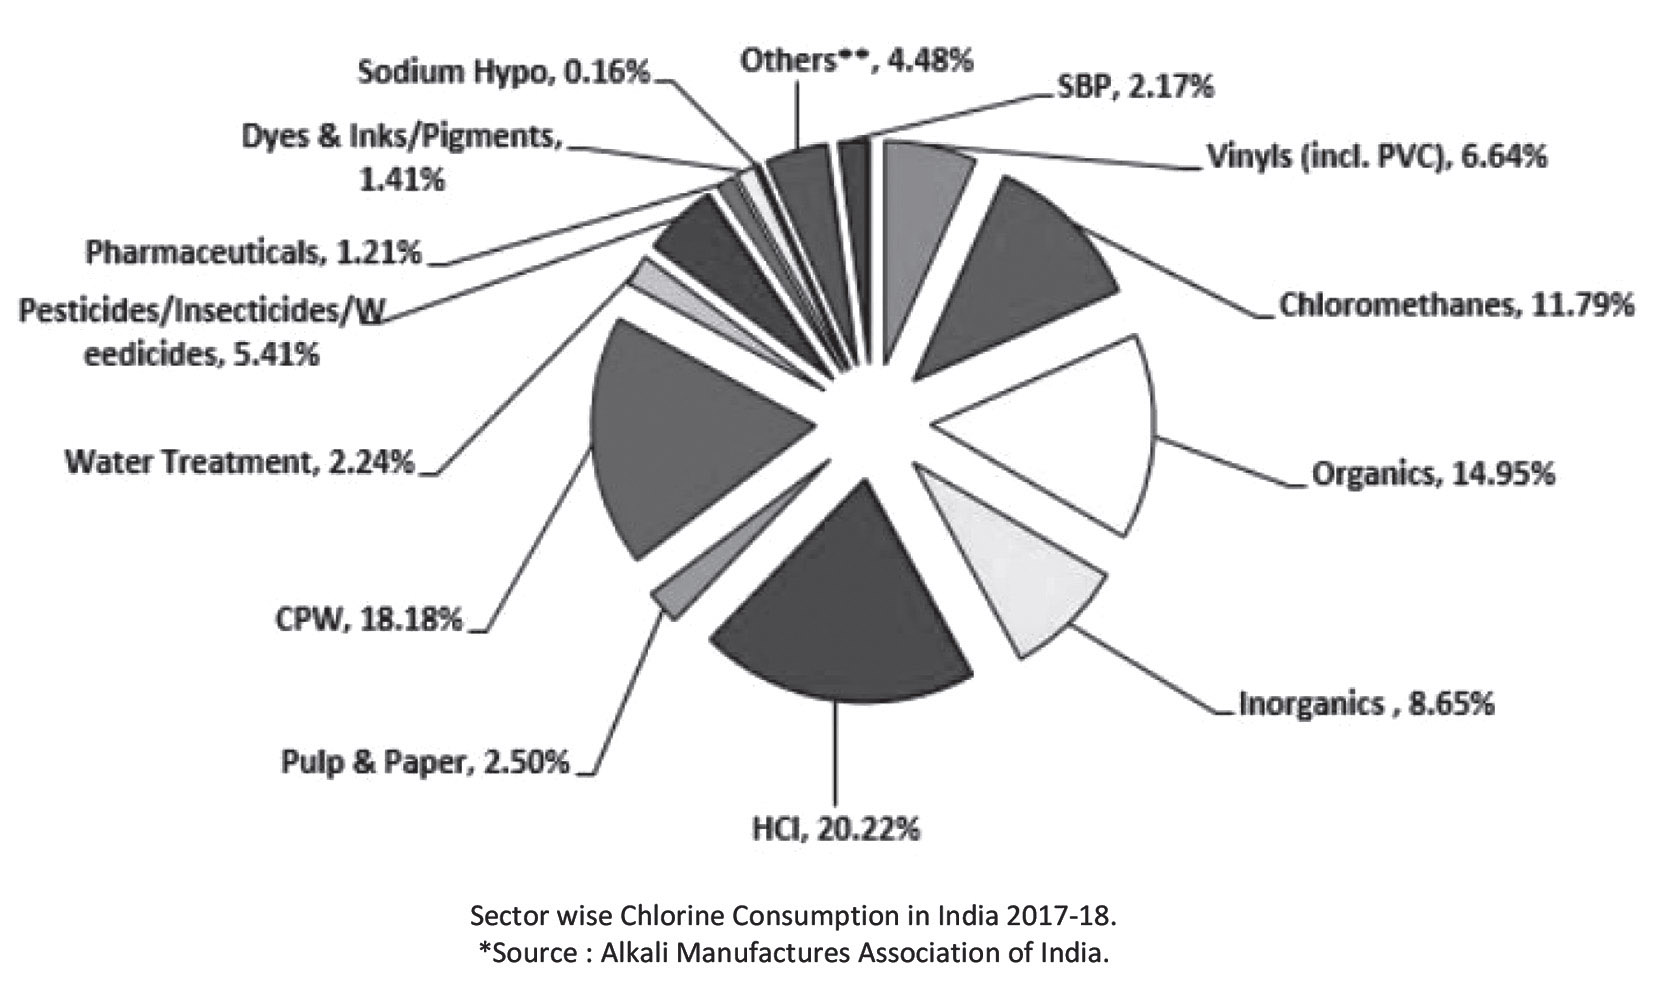 Sector wise Chlorine Consumption in India